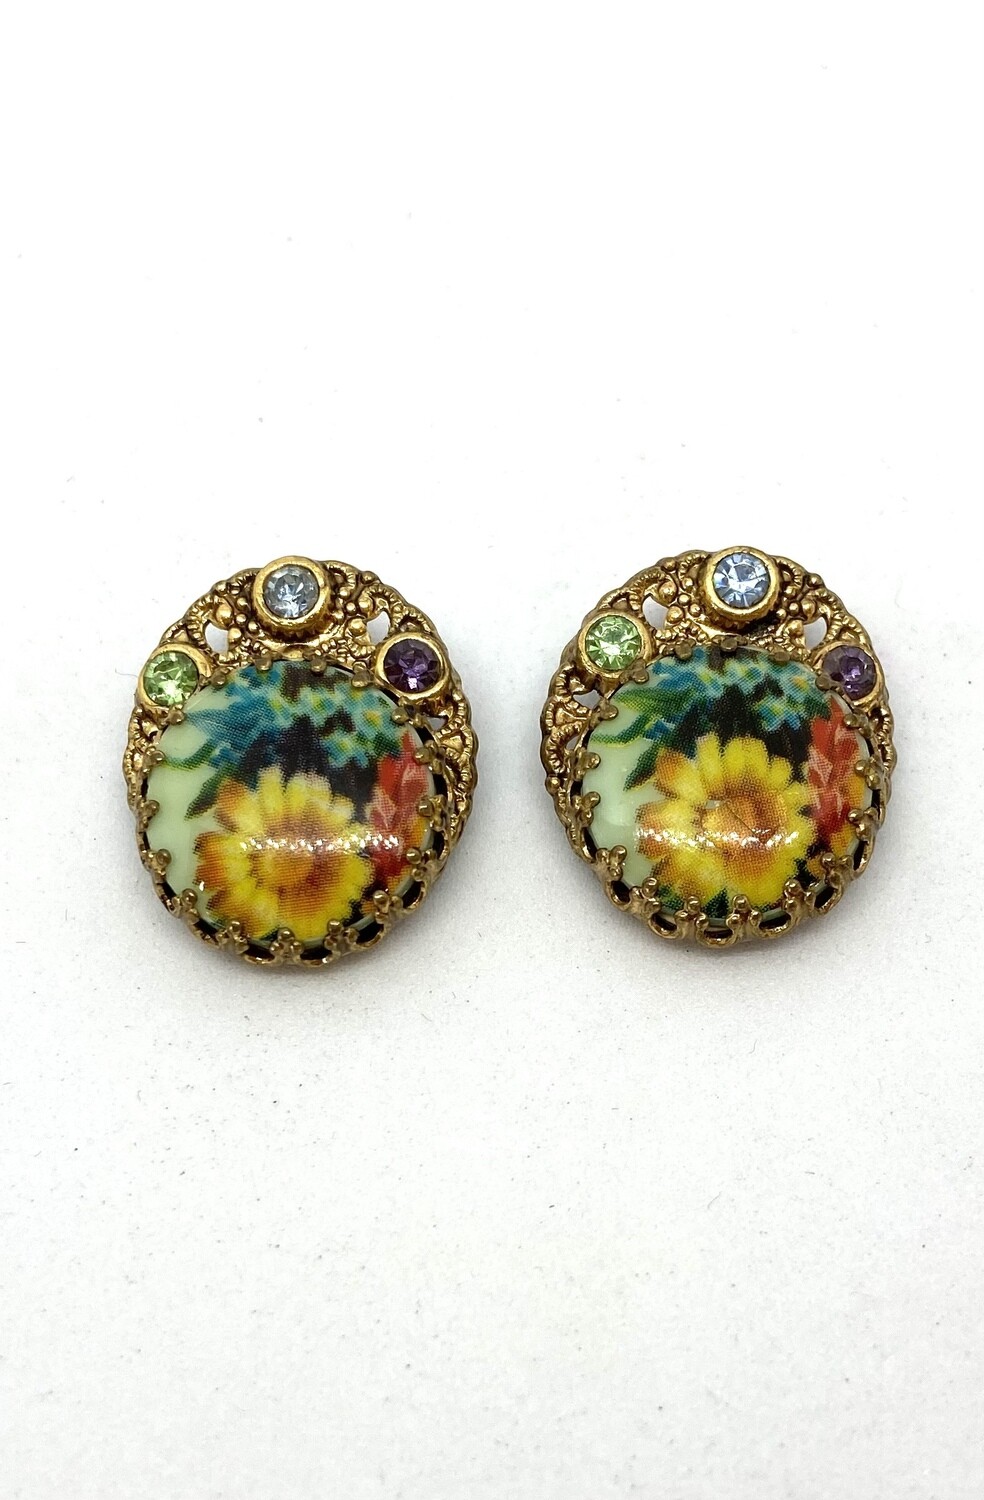 Gold Clip On Earrings With Flower Stone And Colored Gems